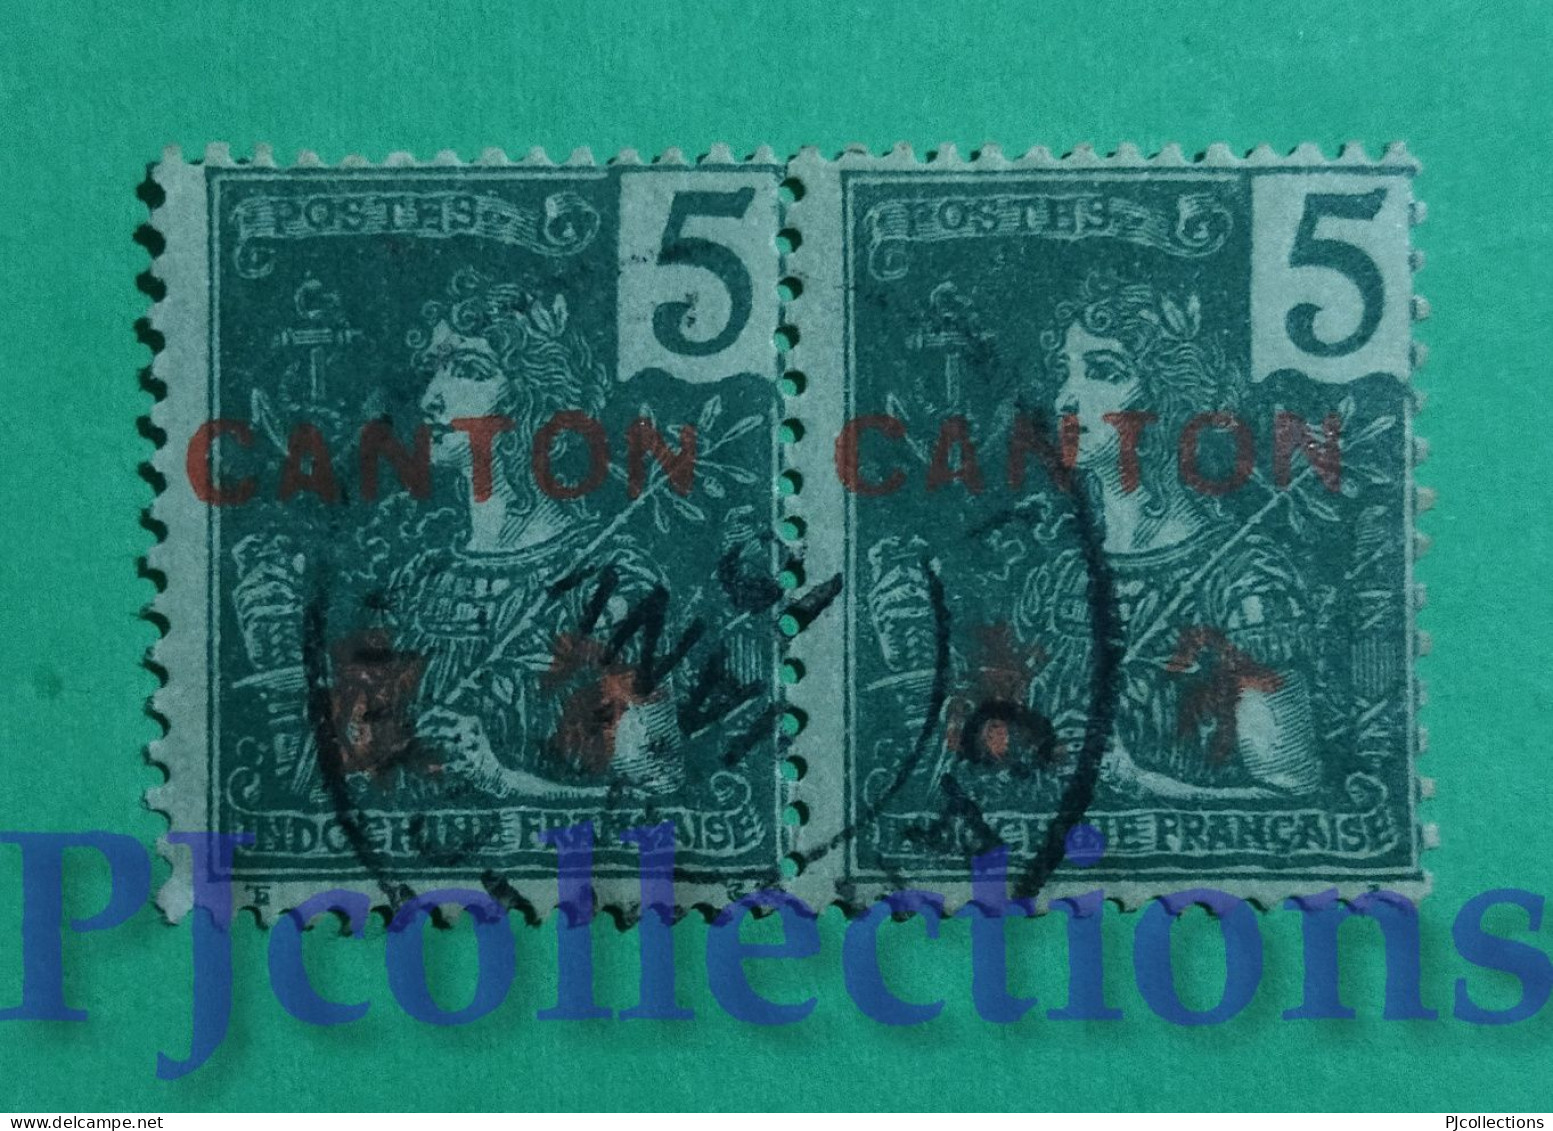 S786- FRENCH INDOCHINA CANTON 1907 OVERPRINTED 5c IN COPPIA - COUPLE USATI - USED - Usati